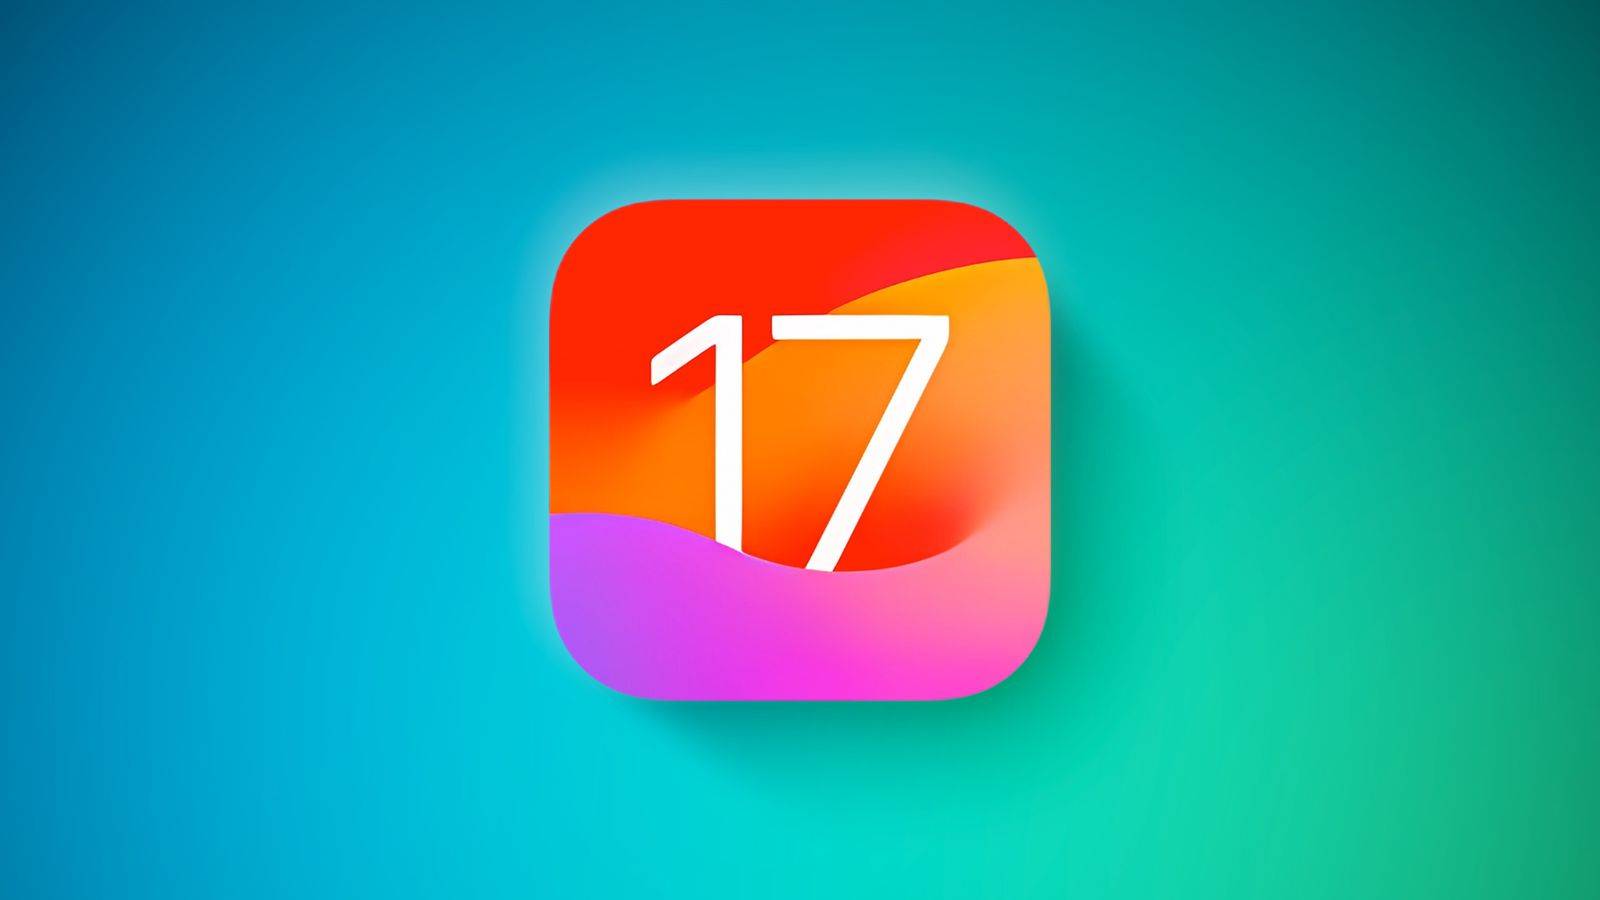 iOS 17.3 List of Changes